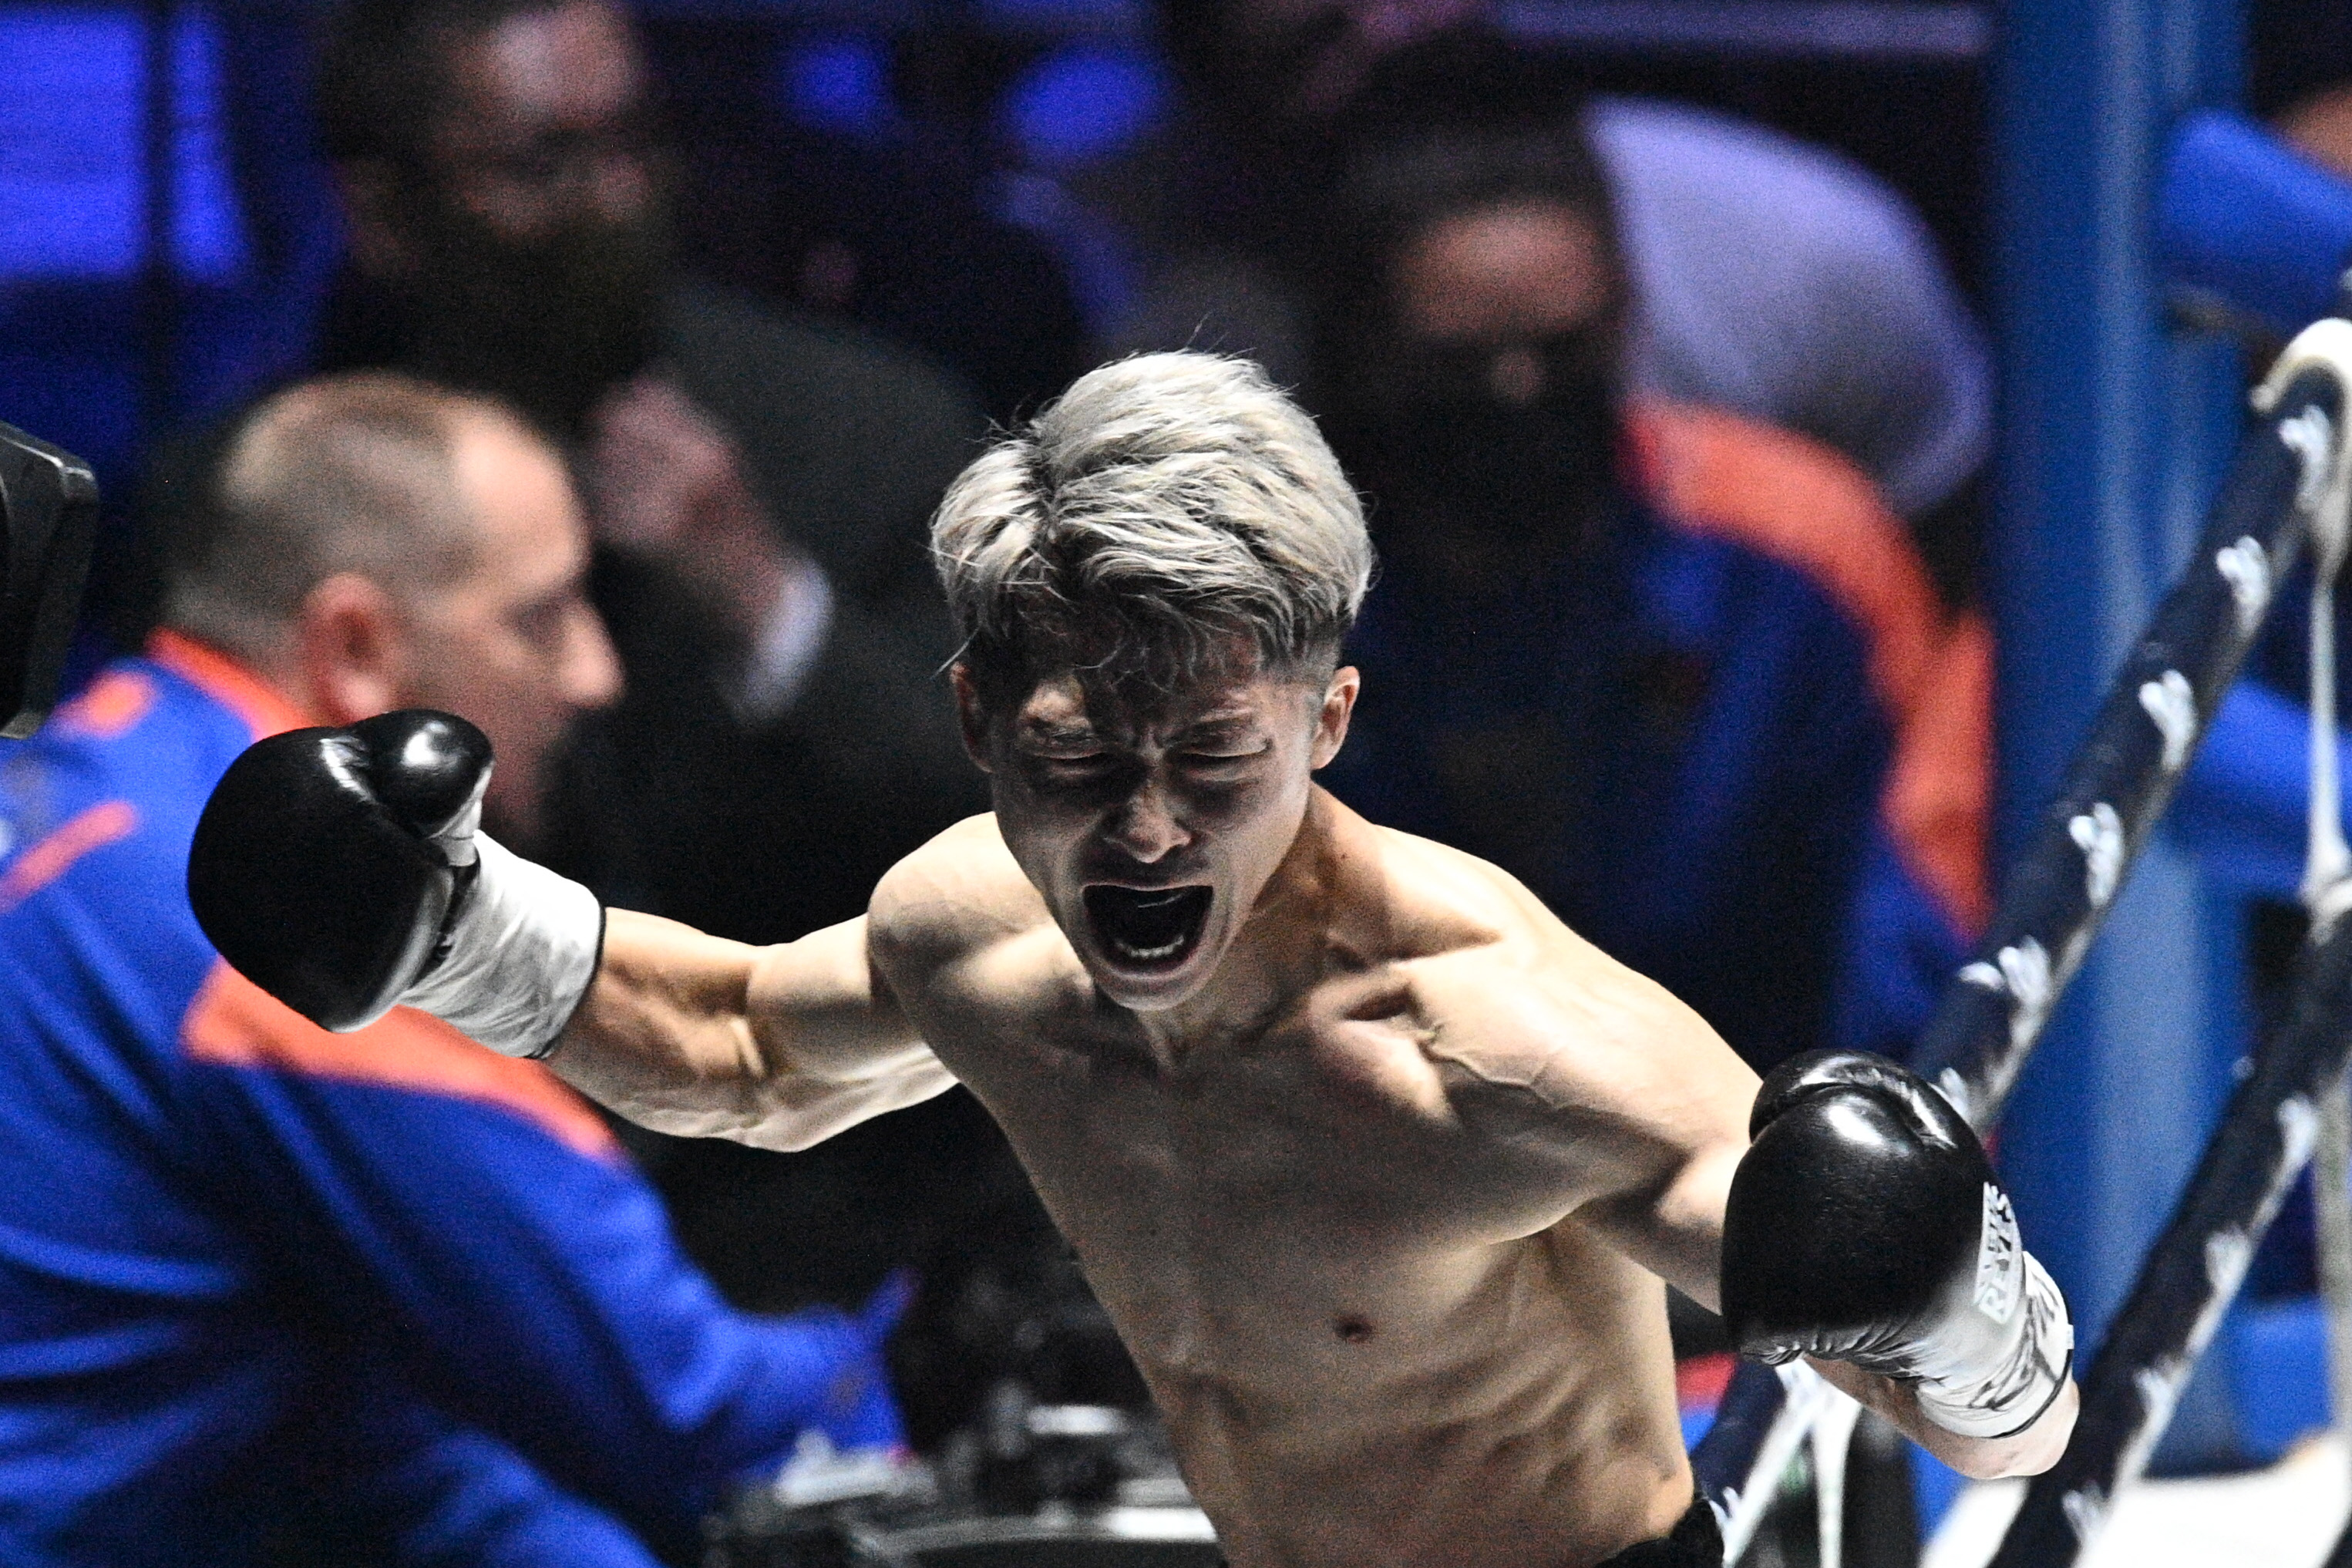 Naoya Inoue celebrates after knocking out Nonito Donaire in their rematch.